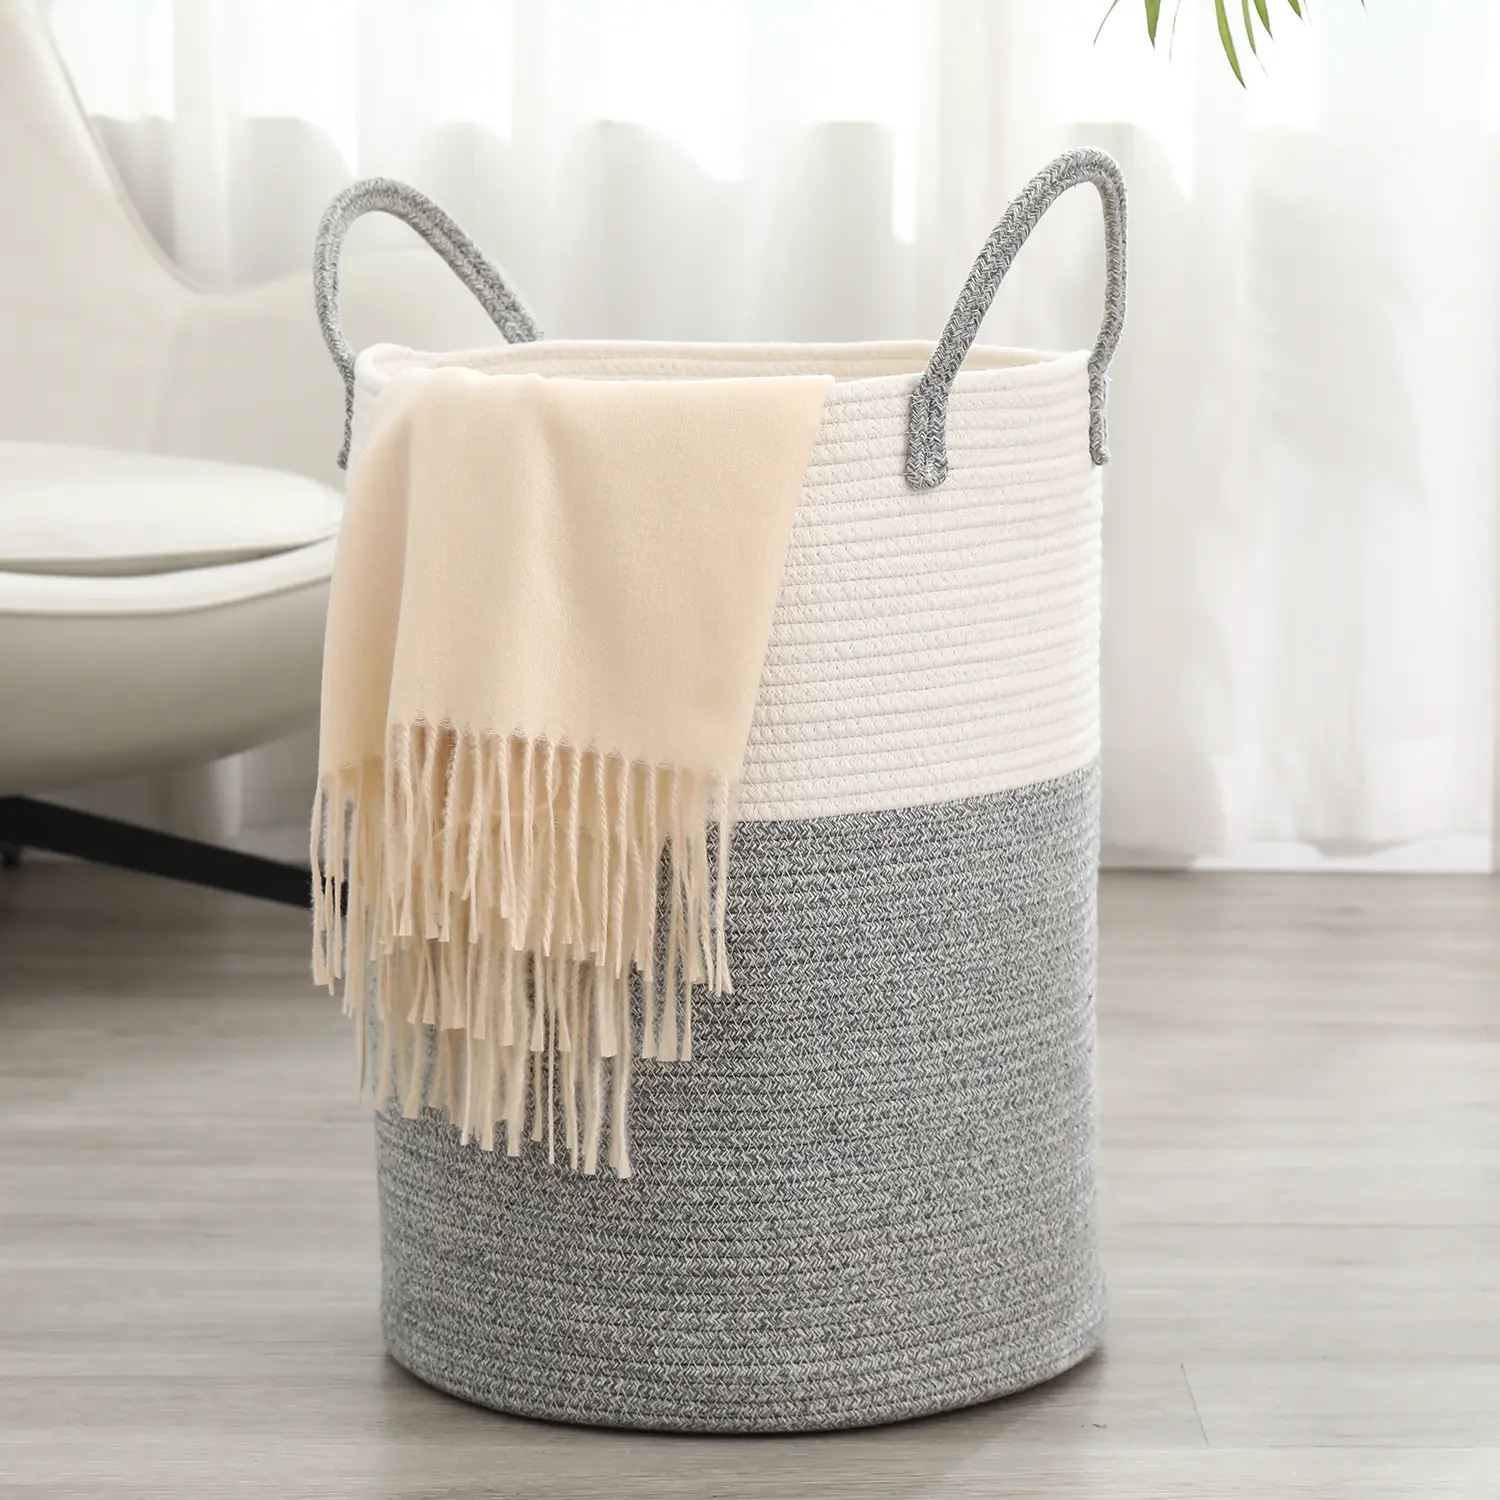 Living Room Tidying Dirty Clothes Applicable To Therefore Round Handle Storage Life Cotton Laundry Basket With Logo